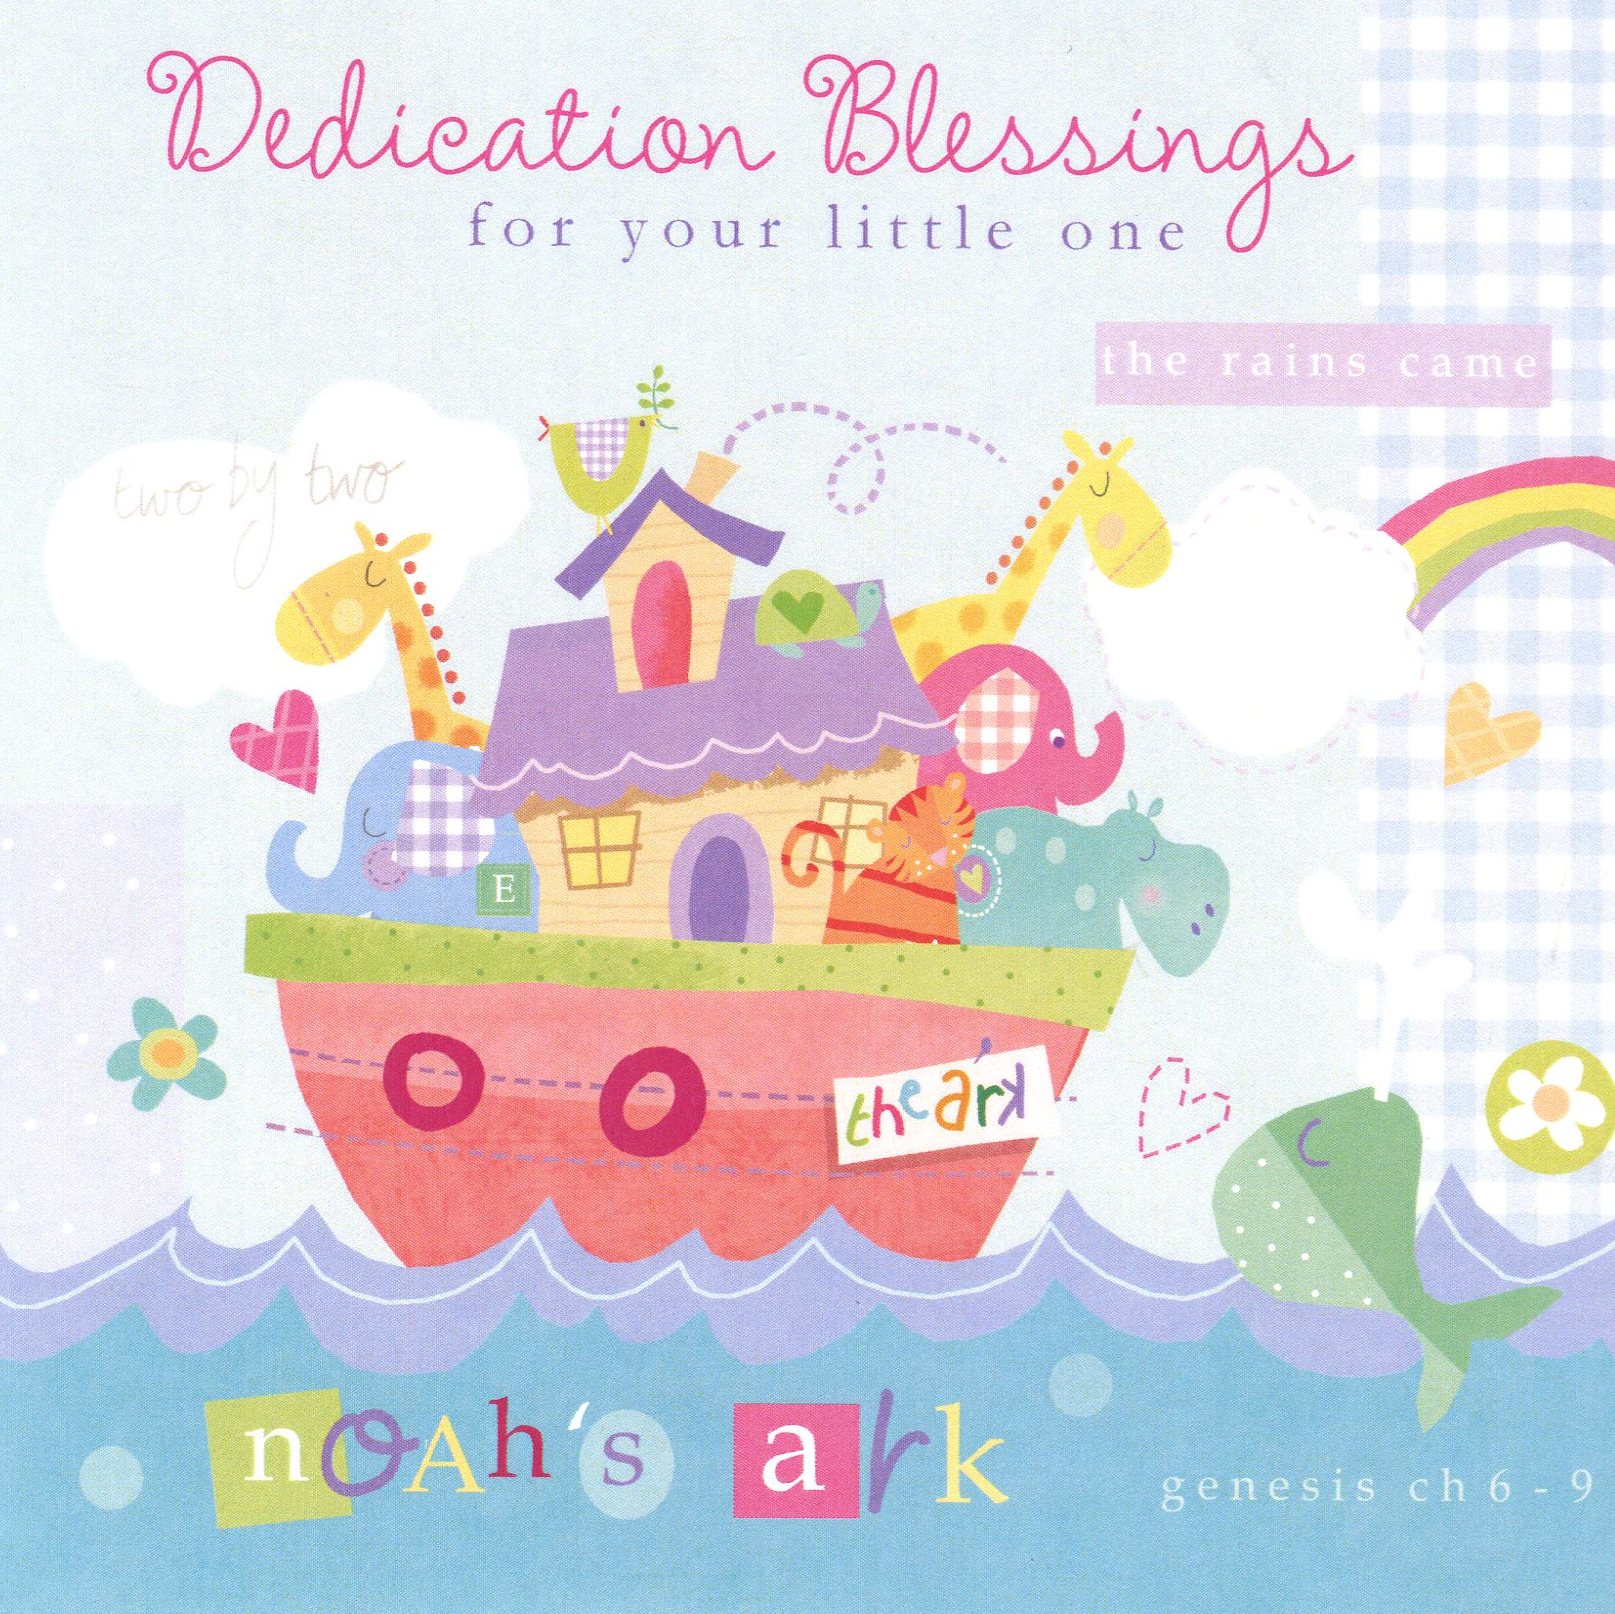 Dedication Blessings for Your Little One - Single Card